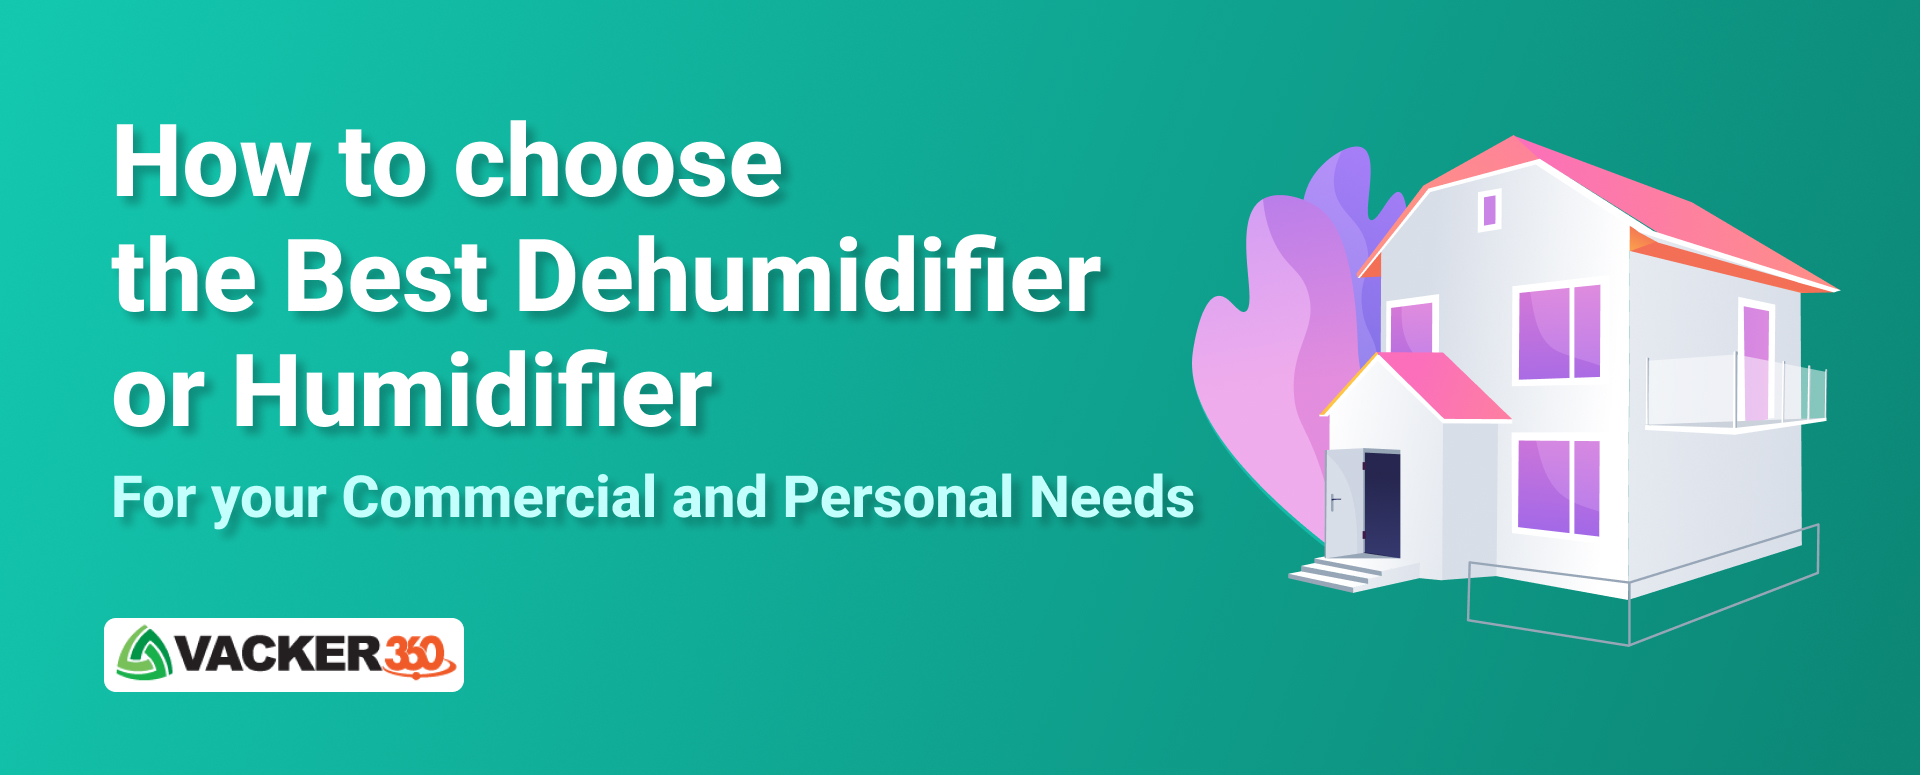 Best Humidifier or Dehumidifier for commercial or personal needs